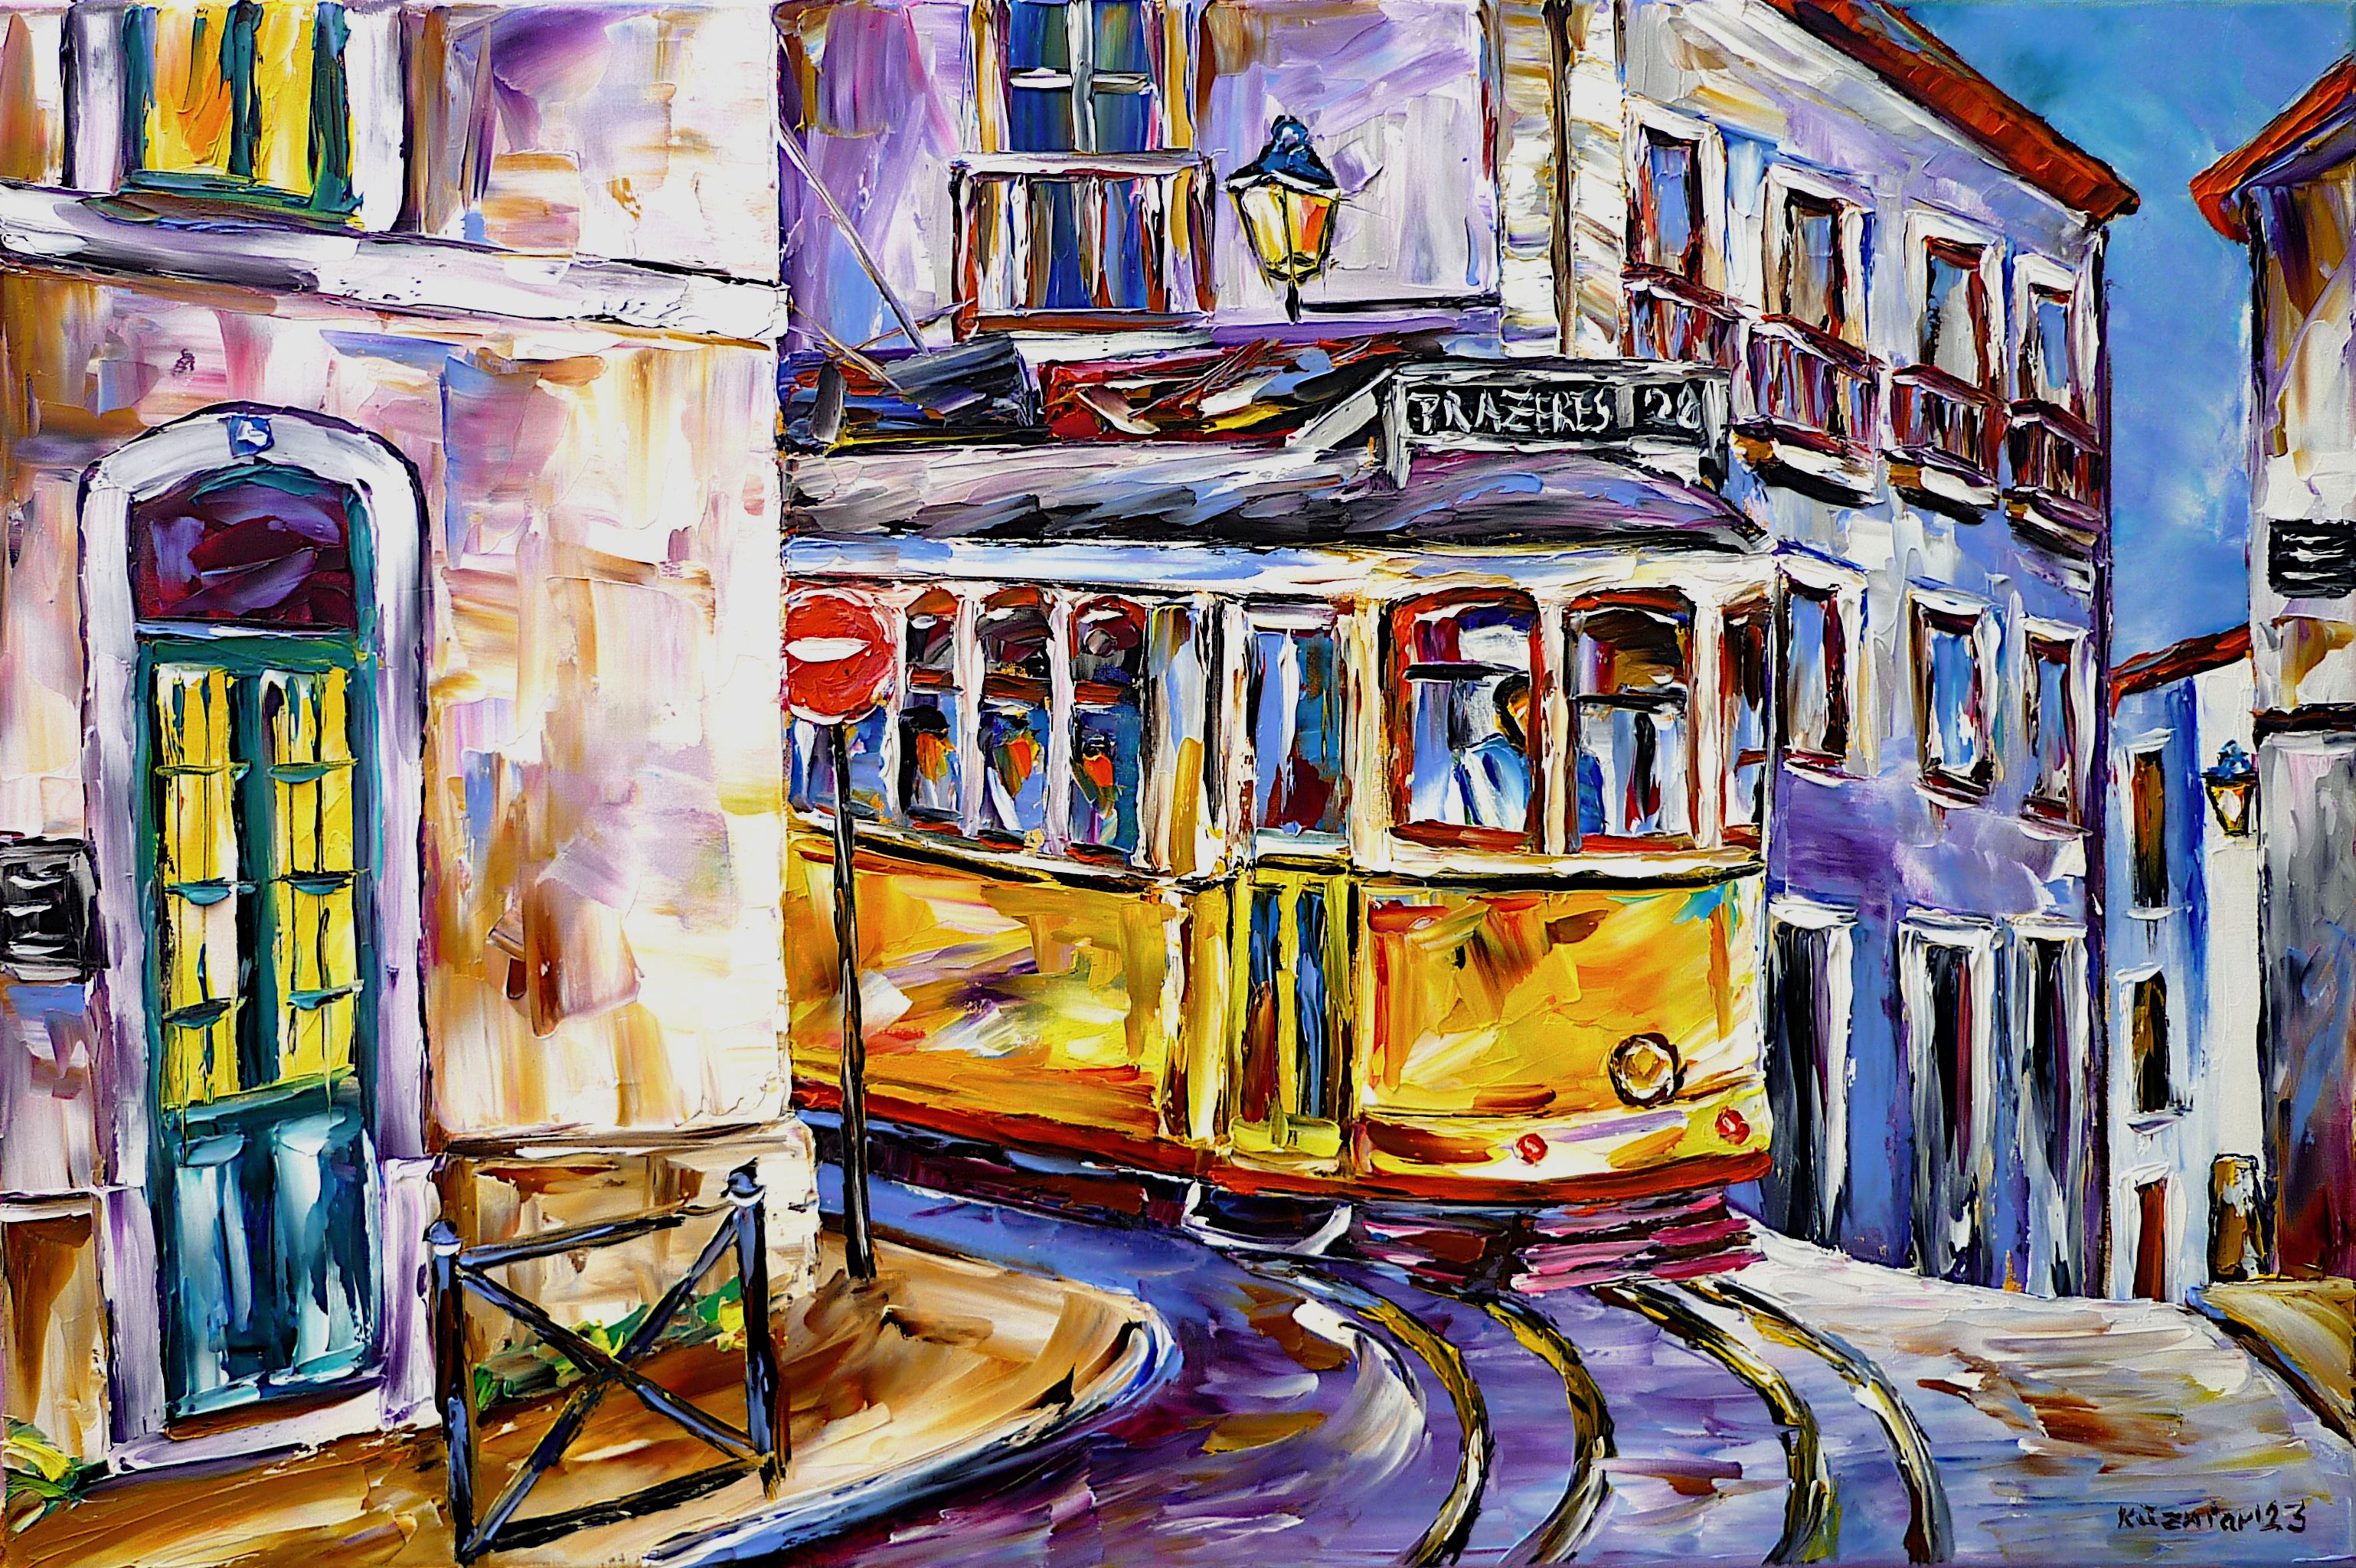 lisbon tram,lisbon cityscape,lisbon city scene,lisbon street scene,yellow tram,lisbon trolley,narrow alleys,lisbon narrow streets,lisbon prazeres,beautiful lisbon,lisbon beauty,beautiful city,old lisbon,tram lovers,trolley love,lisbon painting,lisbon picture,lisbon art,lisbon love,lisbon lover,i love lisbon,palette knife oil painting,modern art,figurative art,figurative painting,contemporary painting,abstract painting,lively colors,colorful painting,bright colors,impasto painting